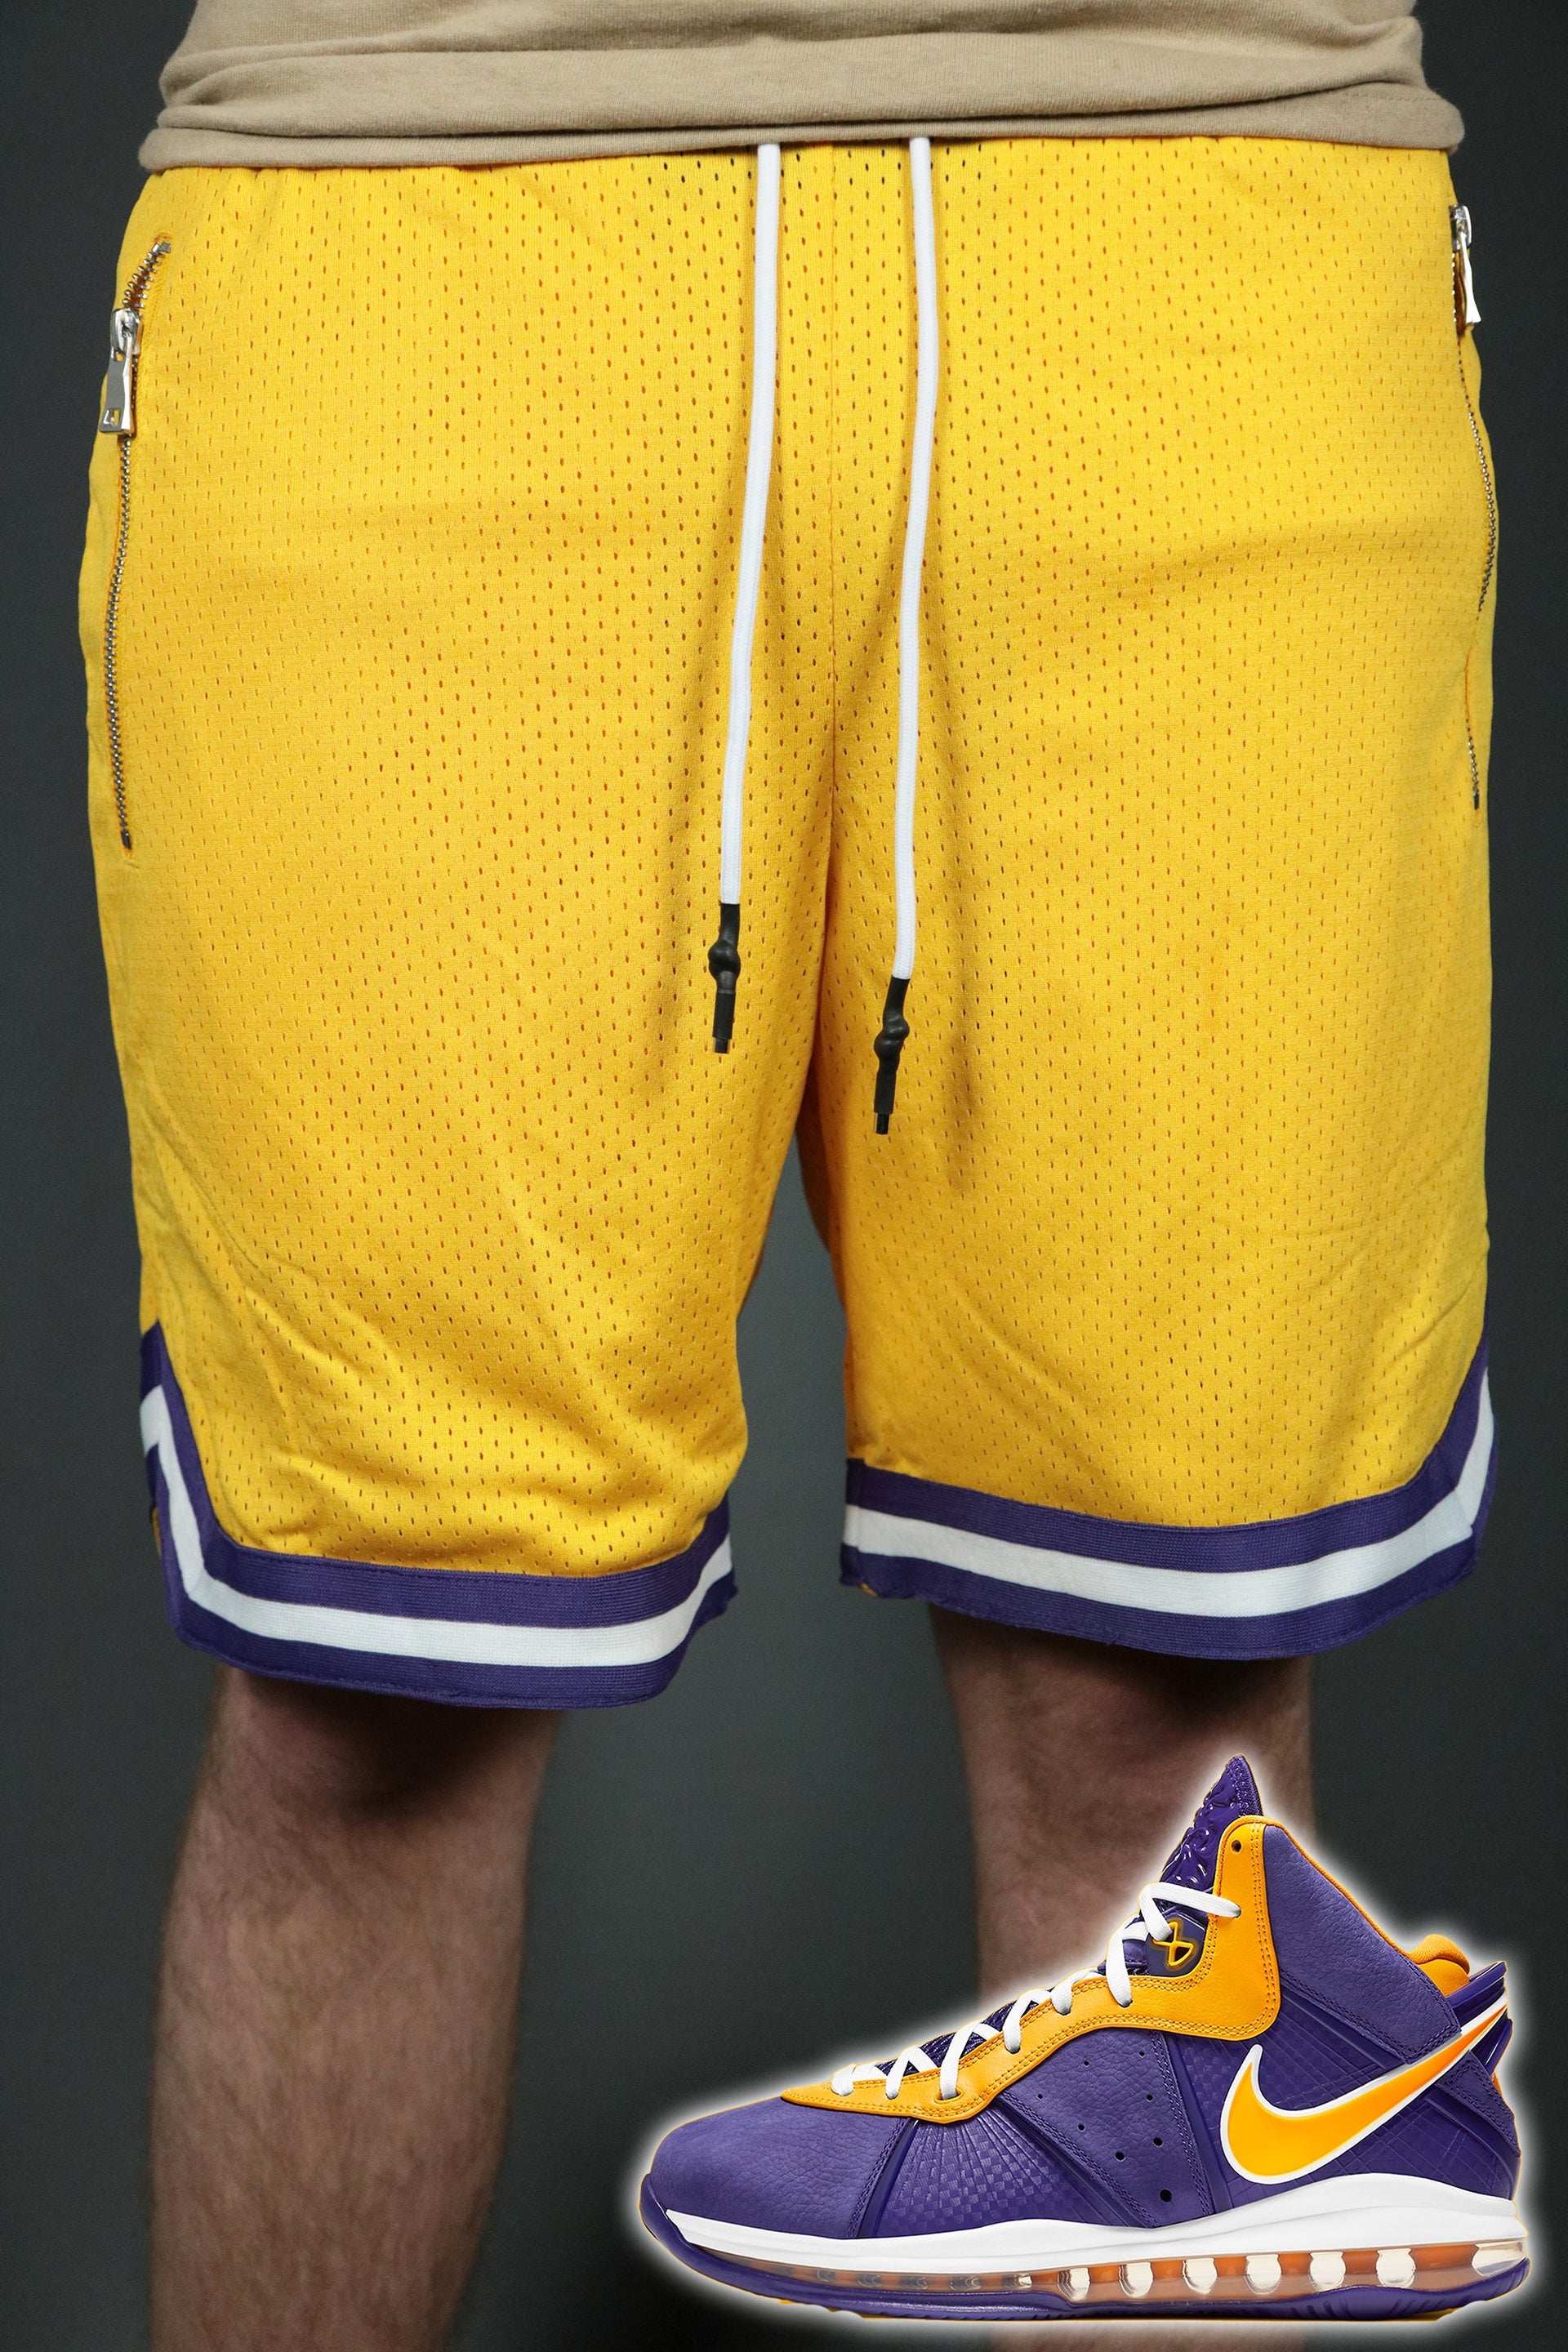 The Los Angeles yellow shorts to match Lebron 8 Lakers sneakers by Jordan Craig.